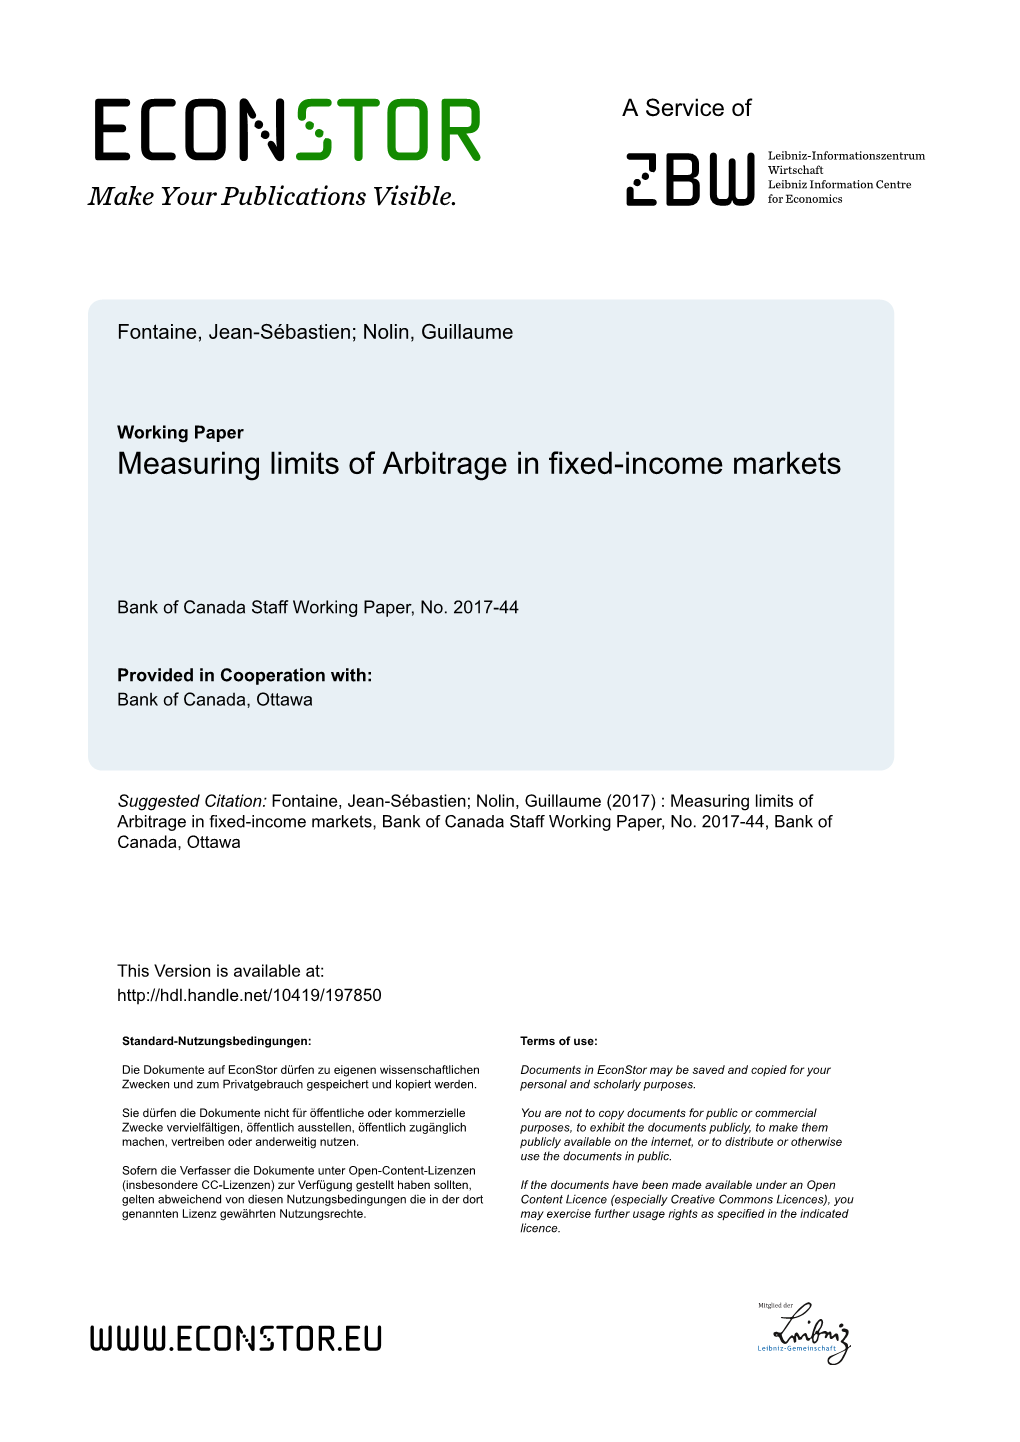 Measuring Limits of Arbitrage in Fixed-Income Markets